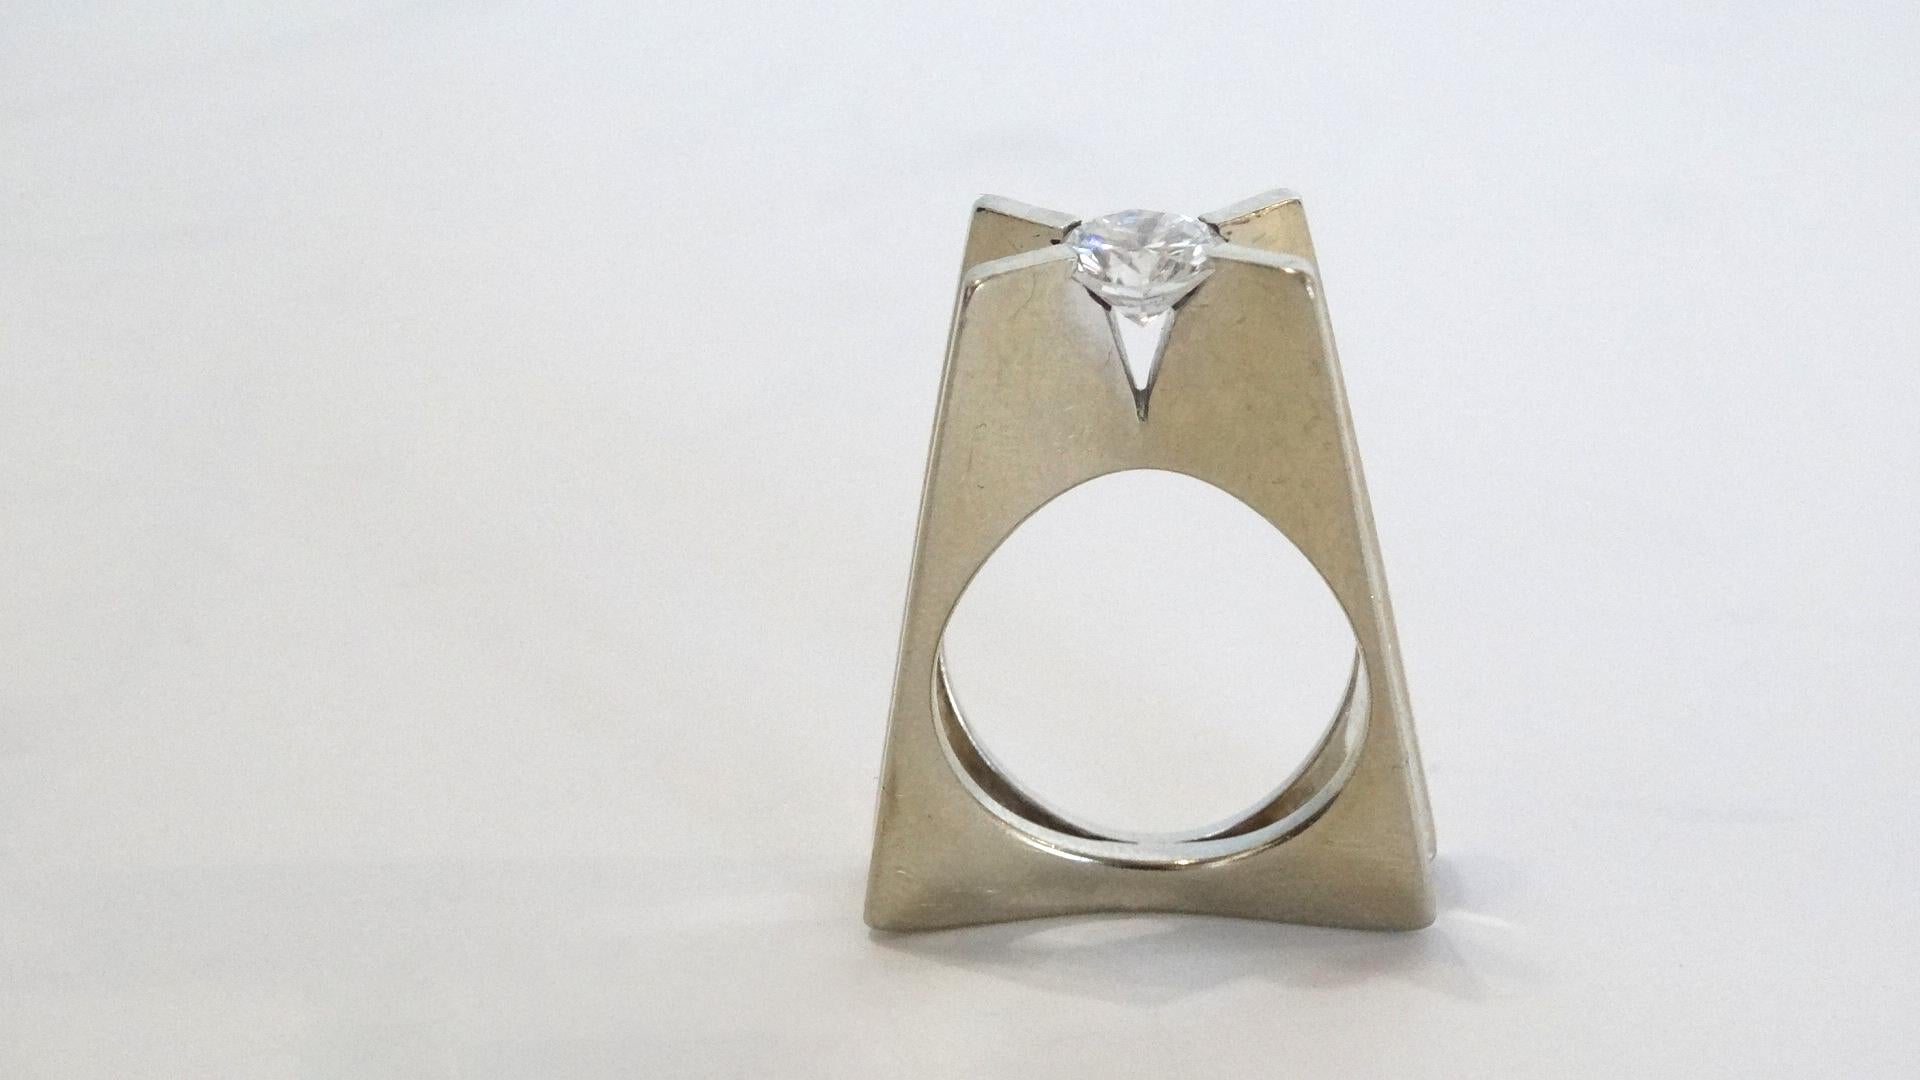 A wonderful Georg Jensen estate piece circa 1960s from the GJ store in NYC on 5th Ave. This ring is 1 ct Diamond, VS1, F color 14k white gold 10.85 total gram weight and a sz 5.5 the designer is George Whitt for Georg Jensen. We acquired this piece